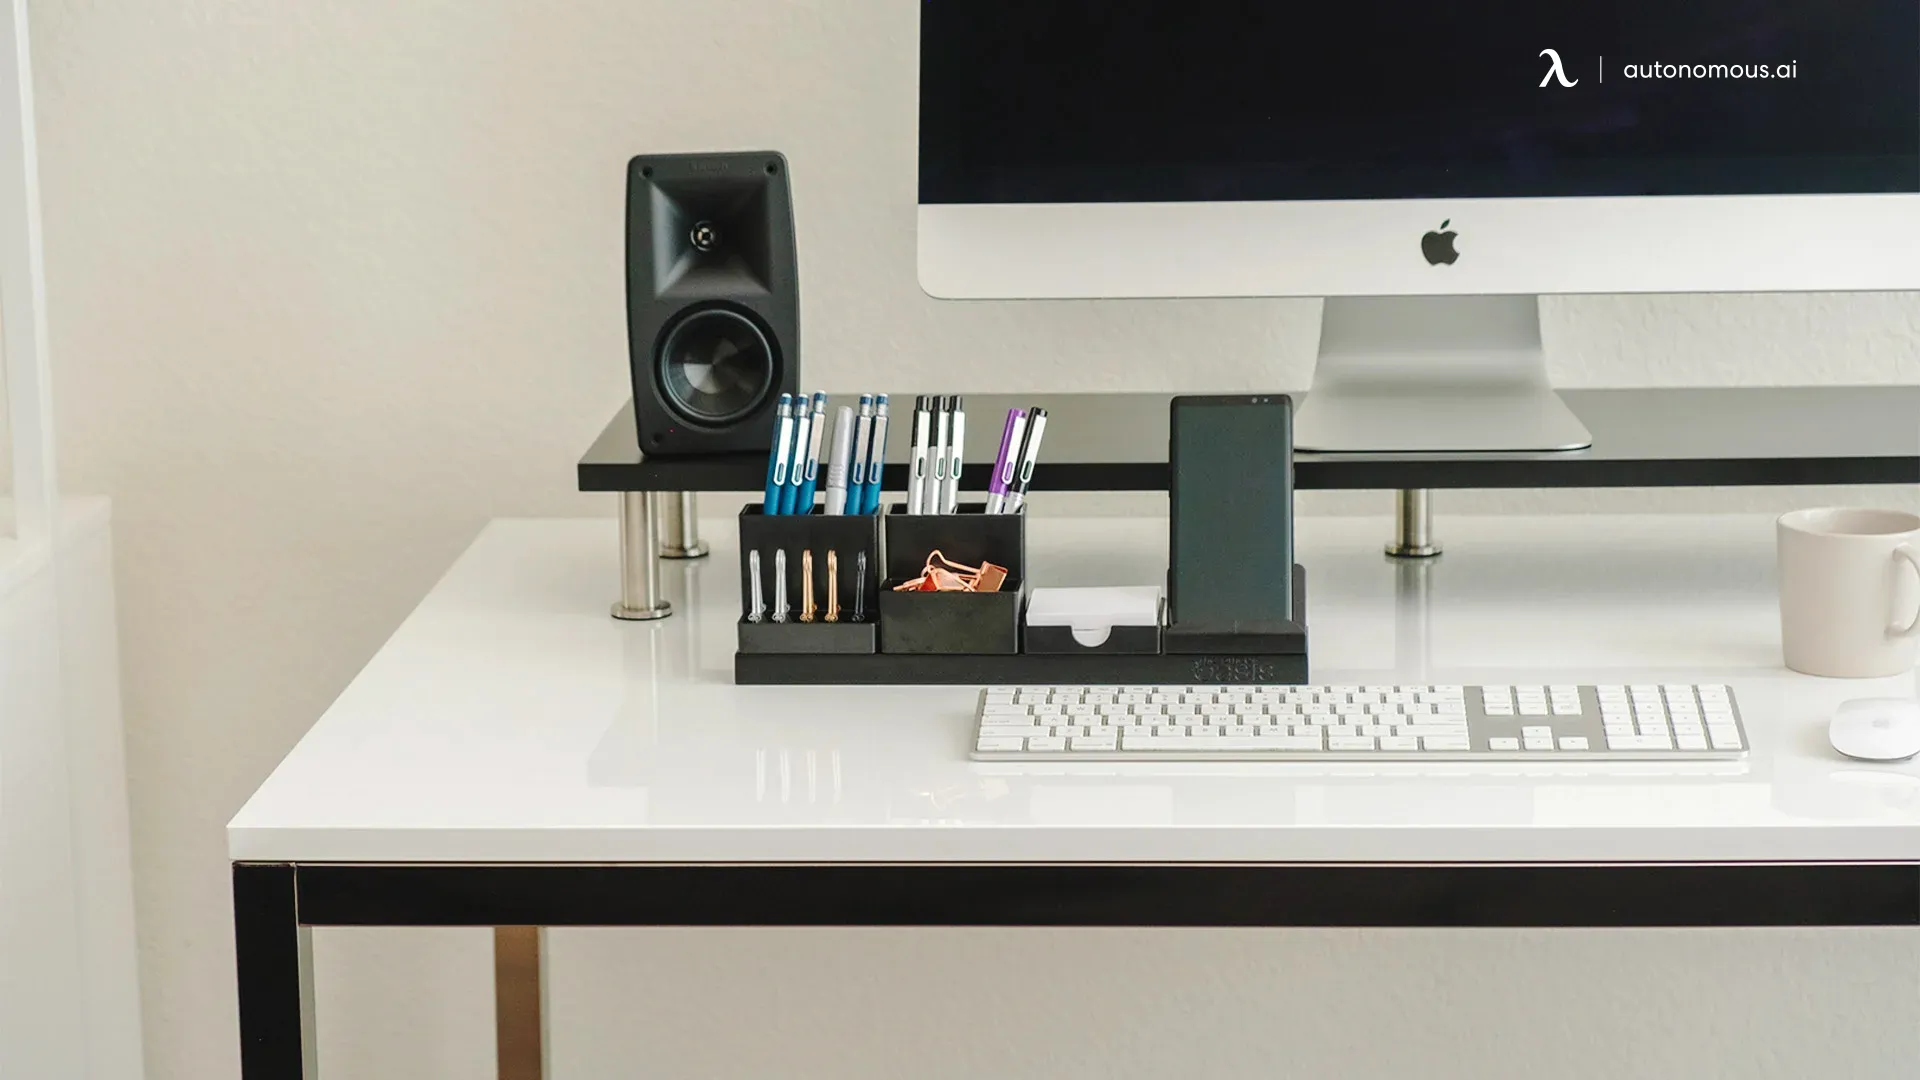 Organizational Tips for an Efficient Workspace